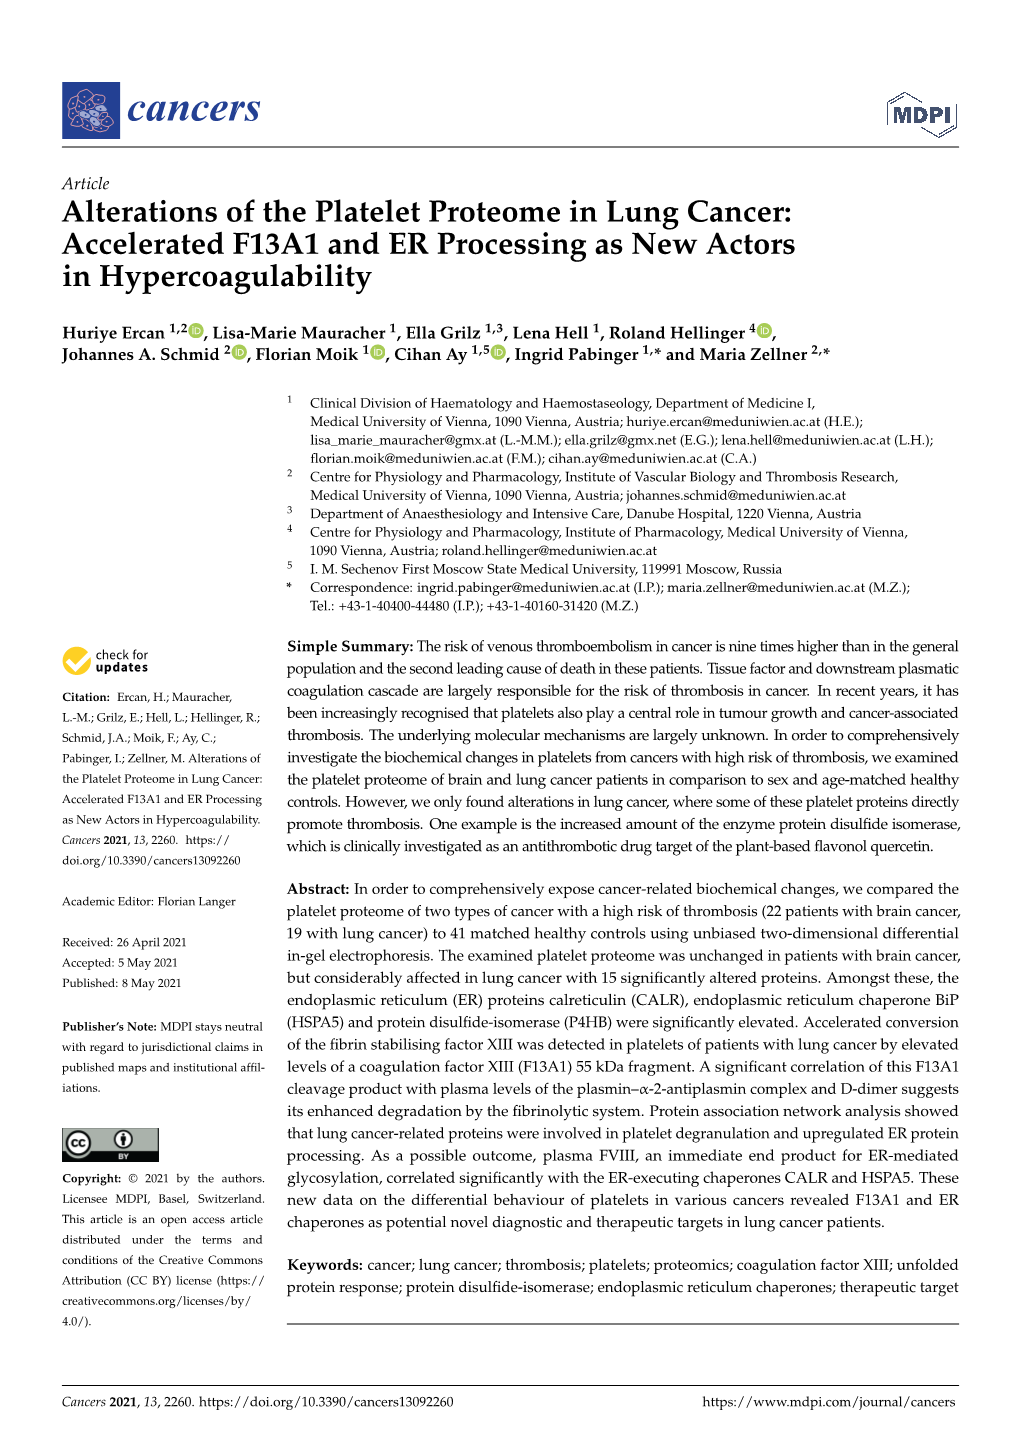 Alterations of the Platelet Proteome in Lung Cancer: Accelerated F13A1 and ER Processing As New Actors in Hypercoagulability